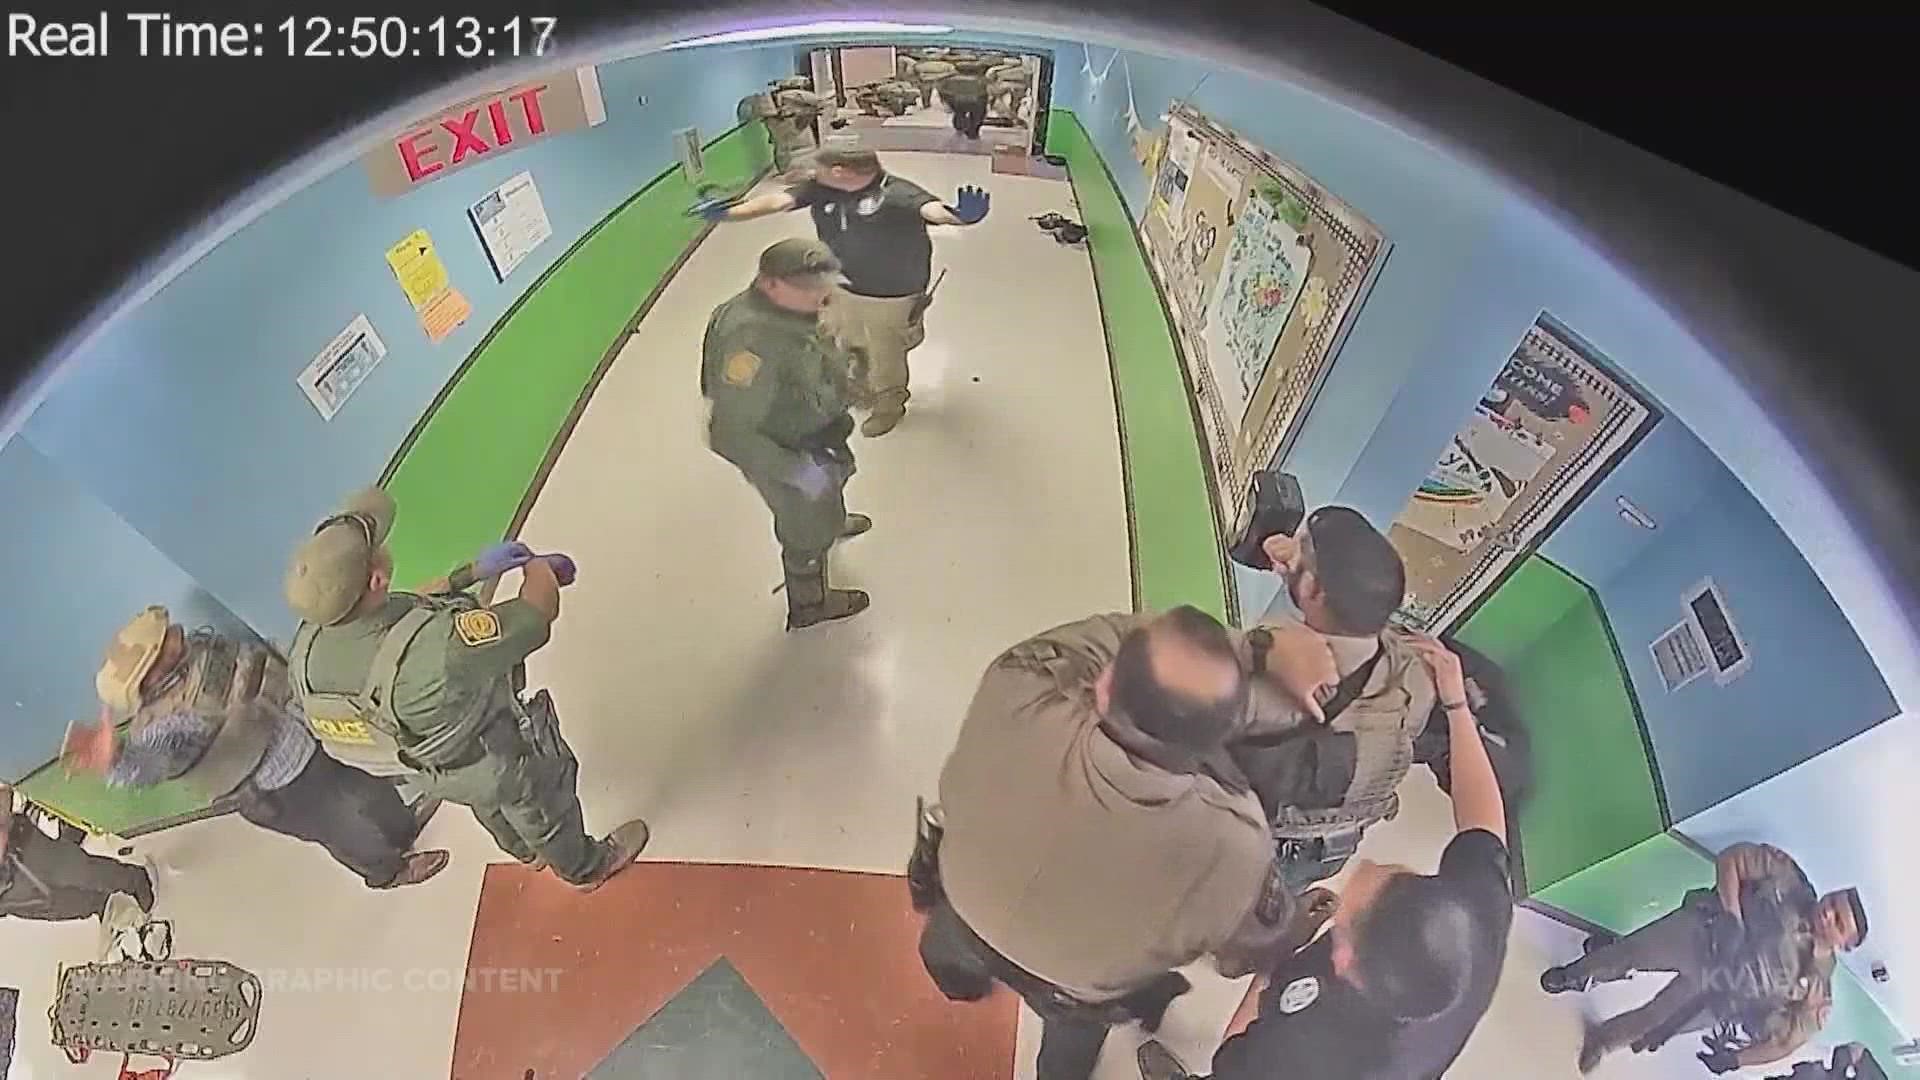 Previously unreleased video from Uvalde shows the gunman walking Robb Elementary's hallways and what police did during the tragedy.